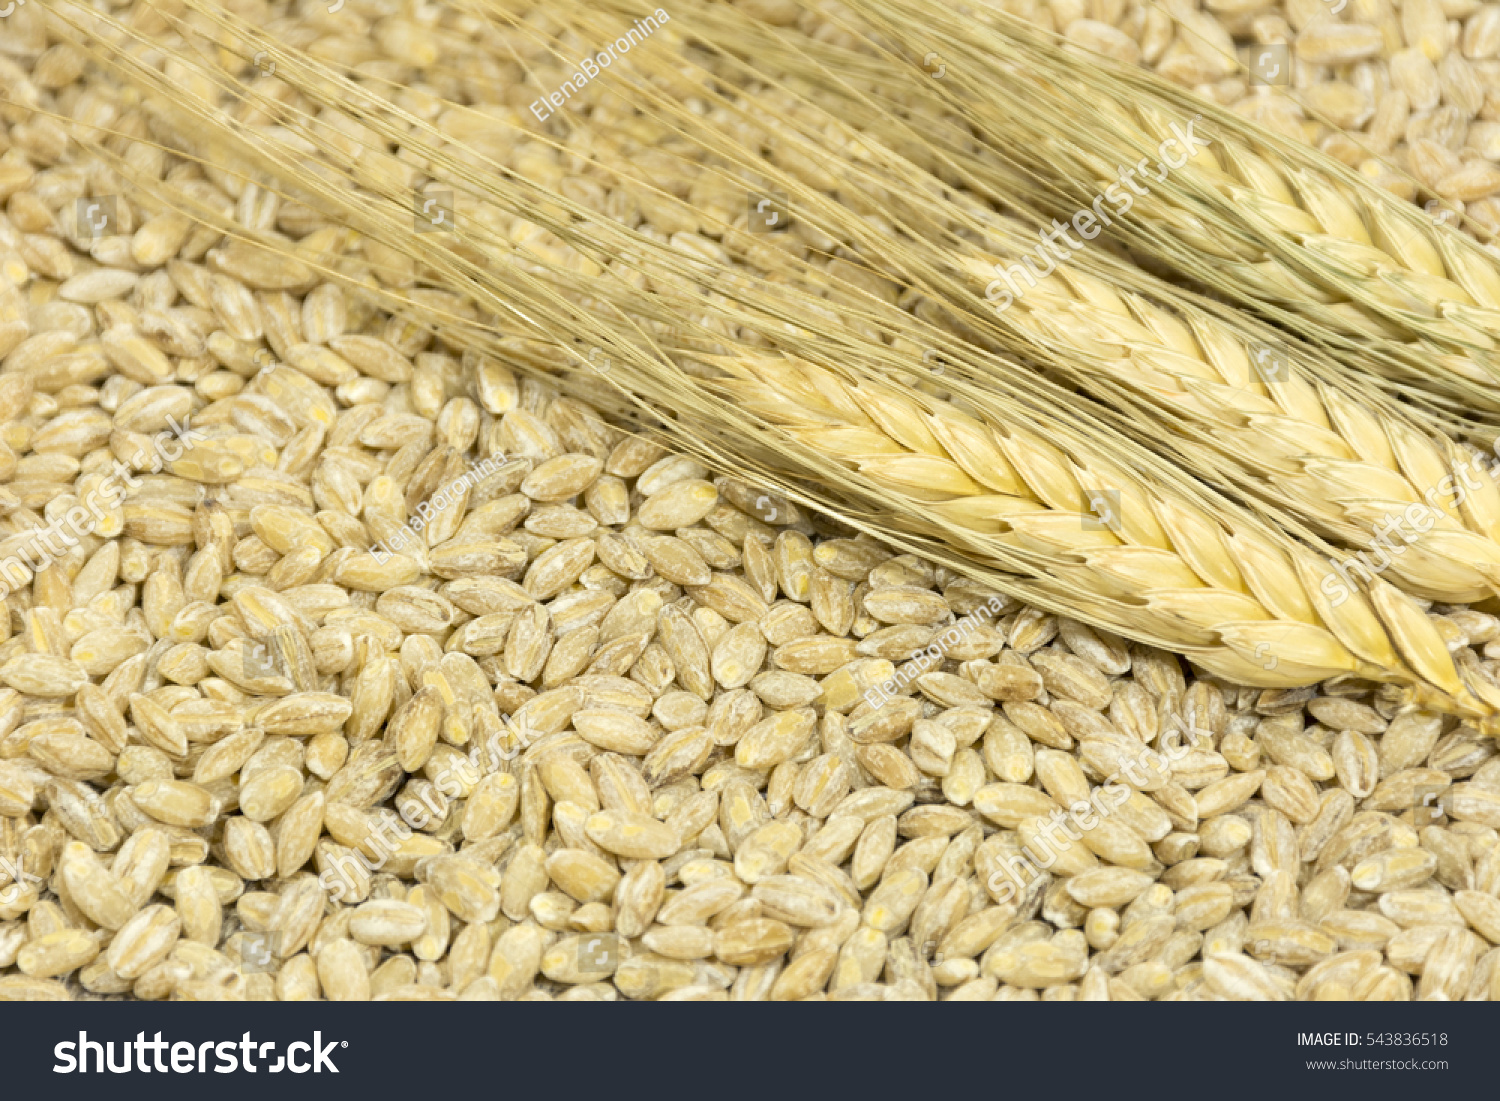 3 spikelets of wheat lying in the grain benefits, fiber, cereal crop, food #543836518